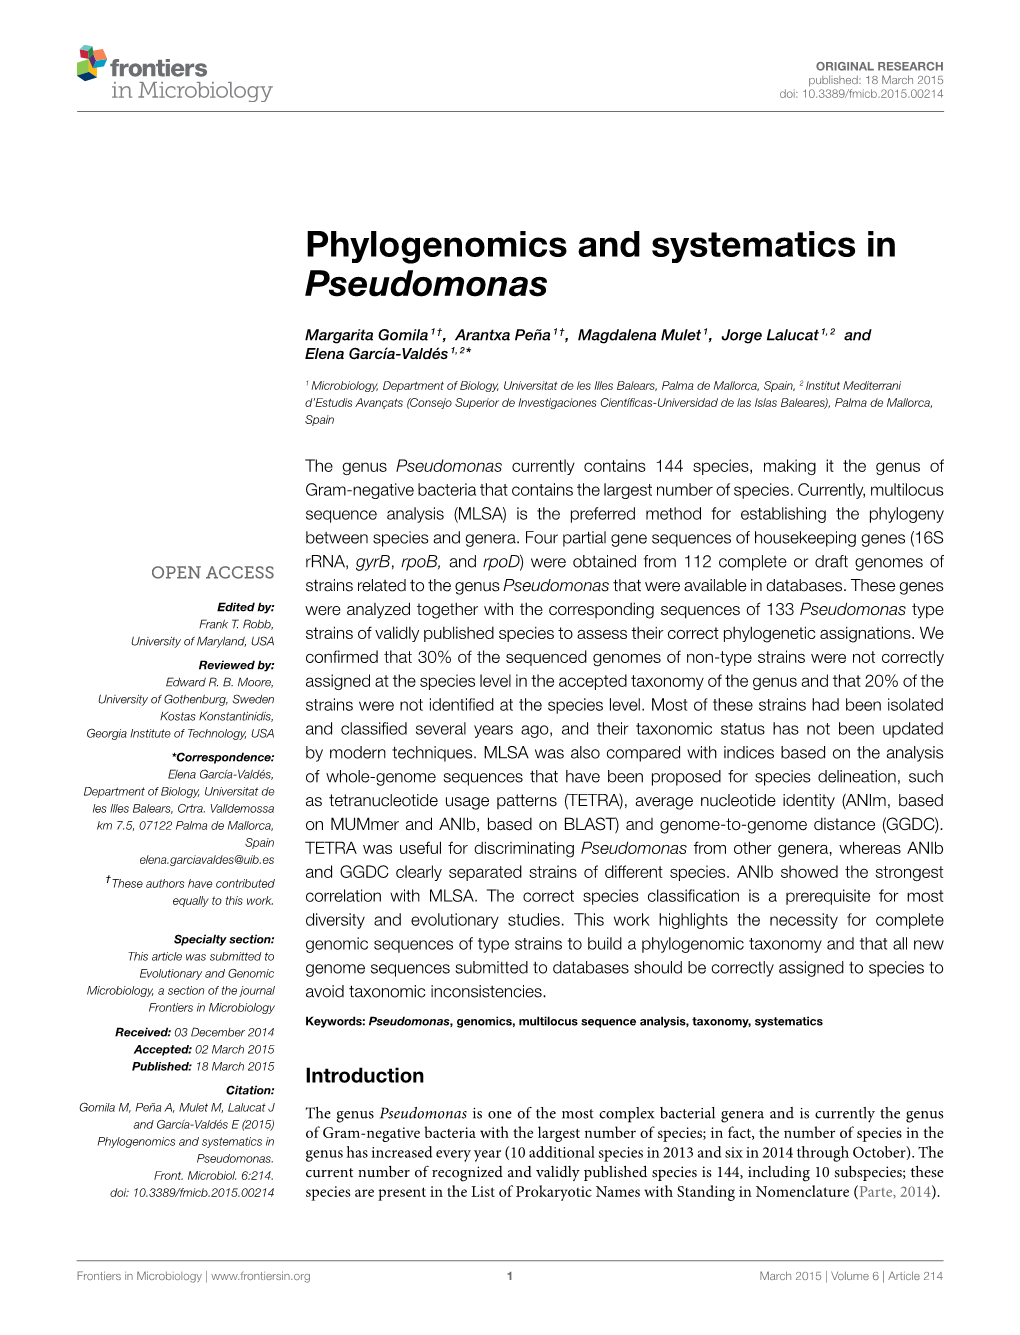 Phylogenomics and Systematics in Pseudomonas